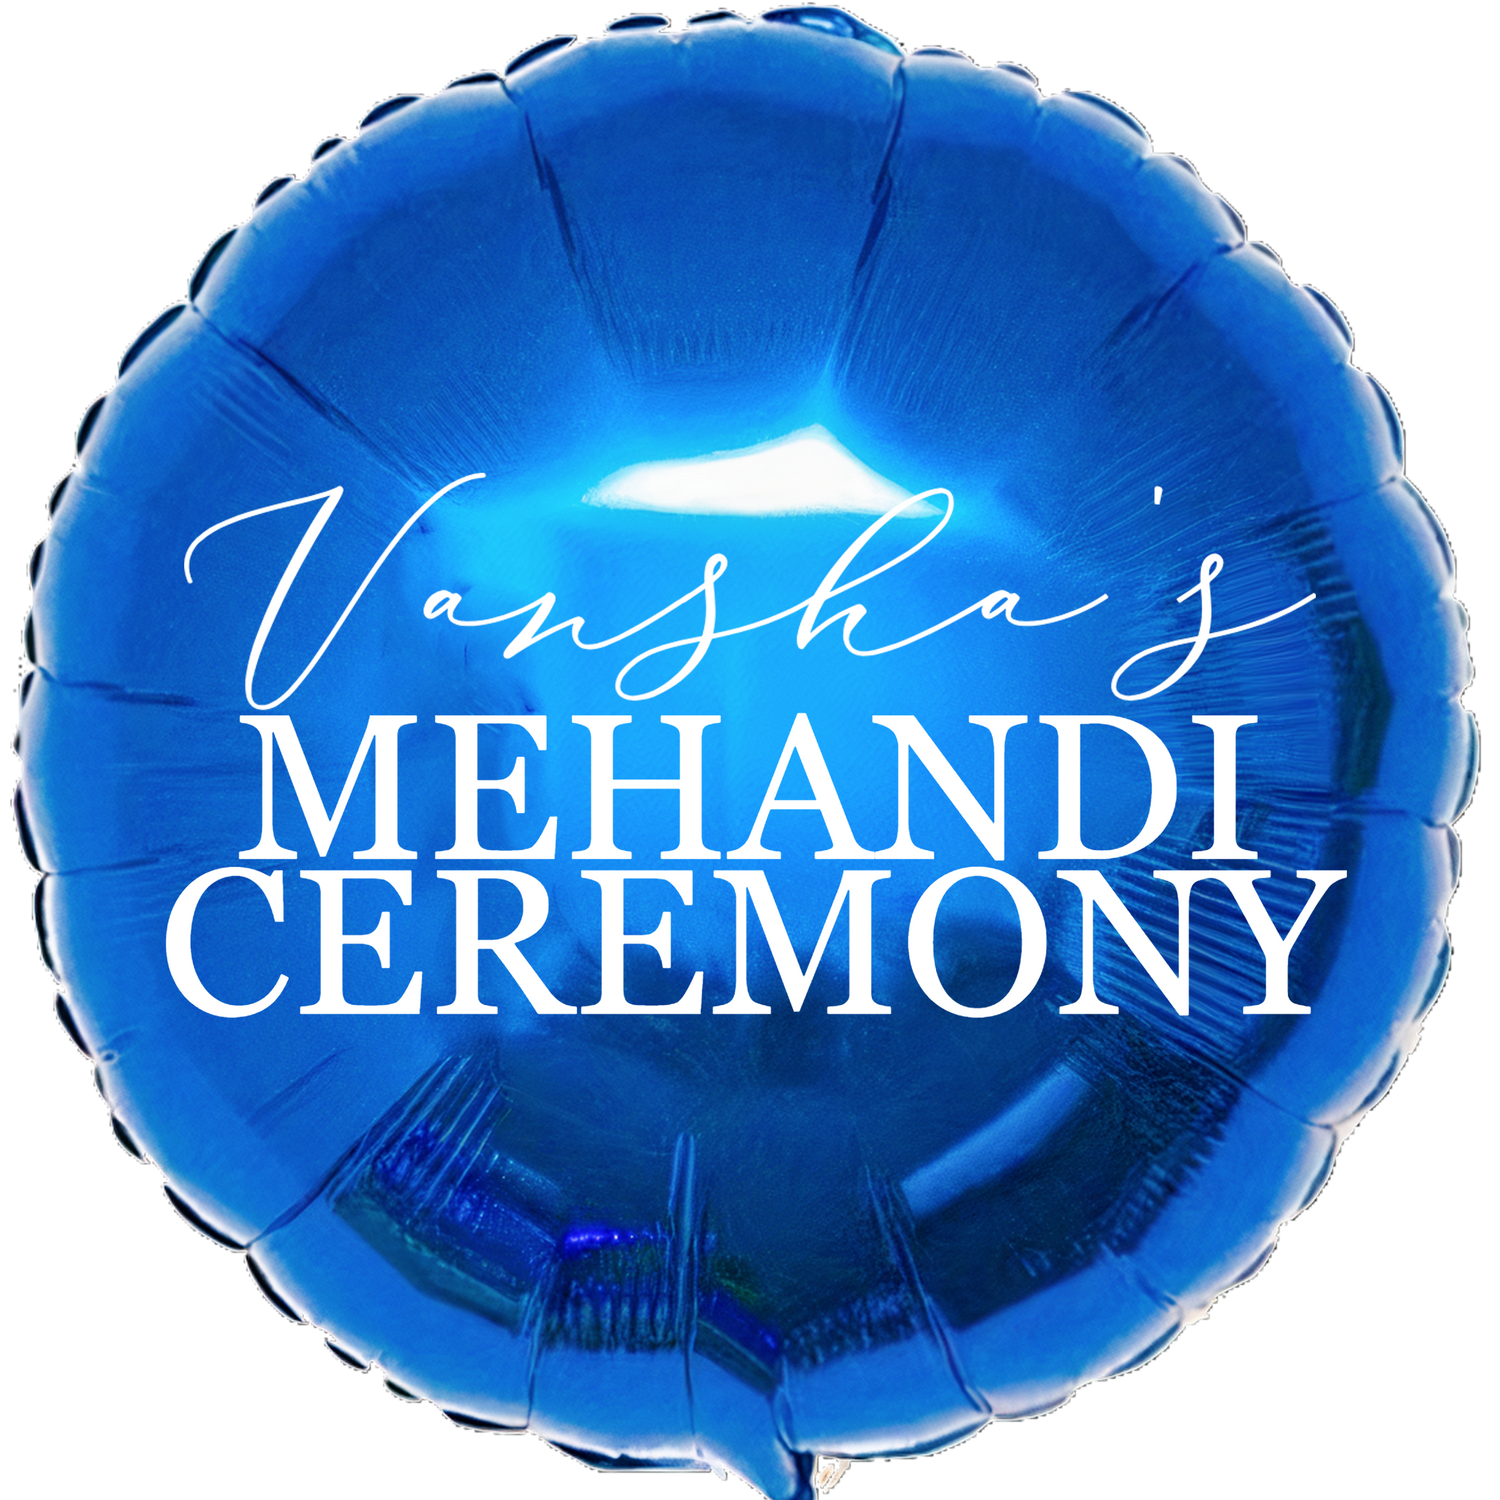 Custom Name/Text/Message Blue Round Balloons For Mehandi Ceremony Decoration. Supports Helium/Air, our Luxury Bespoke Balloons Are a Perfect Surprise For The Amazing Bride. Perfect For Pre-Wedding Decoration, Destination Wedding Shoots, Bridal Henna Ceremony Decoration, Sangeeth Ceremony And Indoor Gatherings.